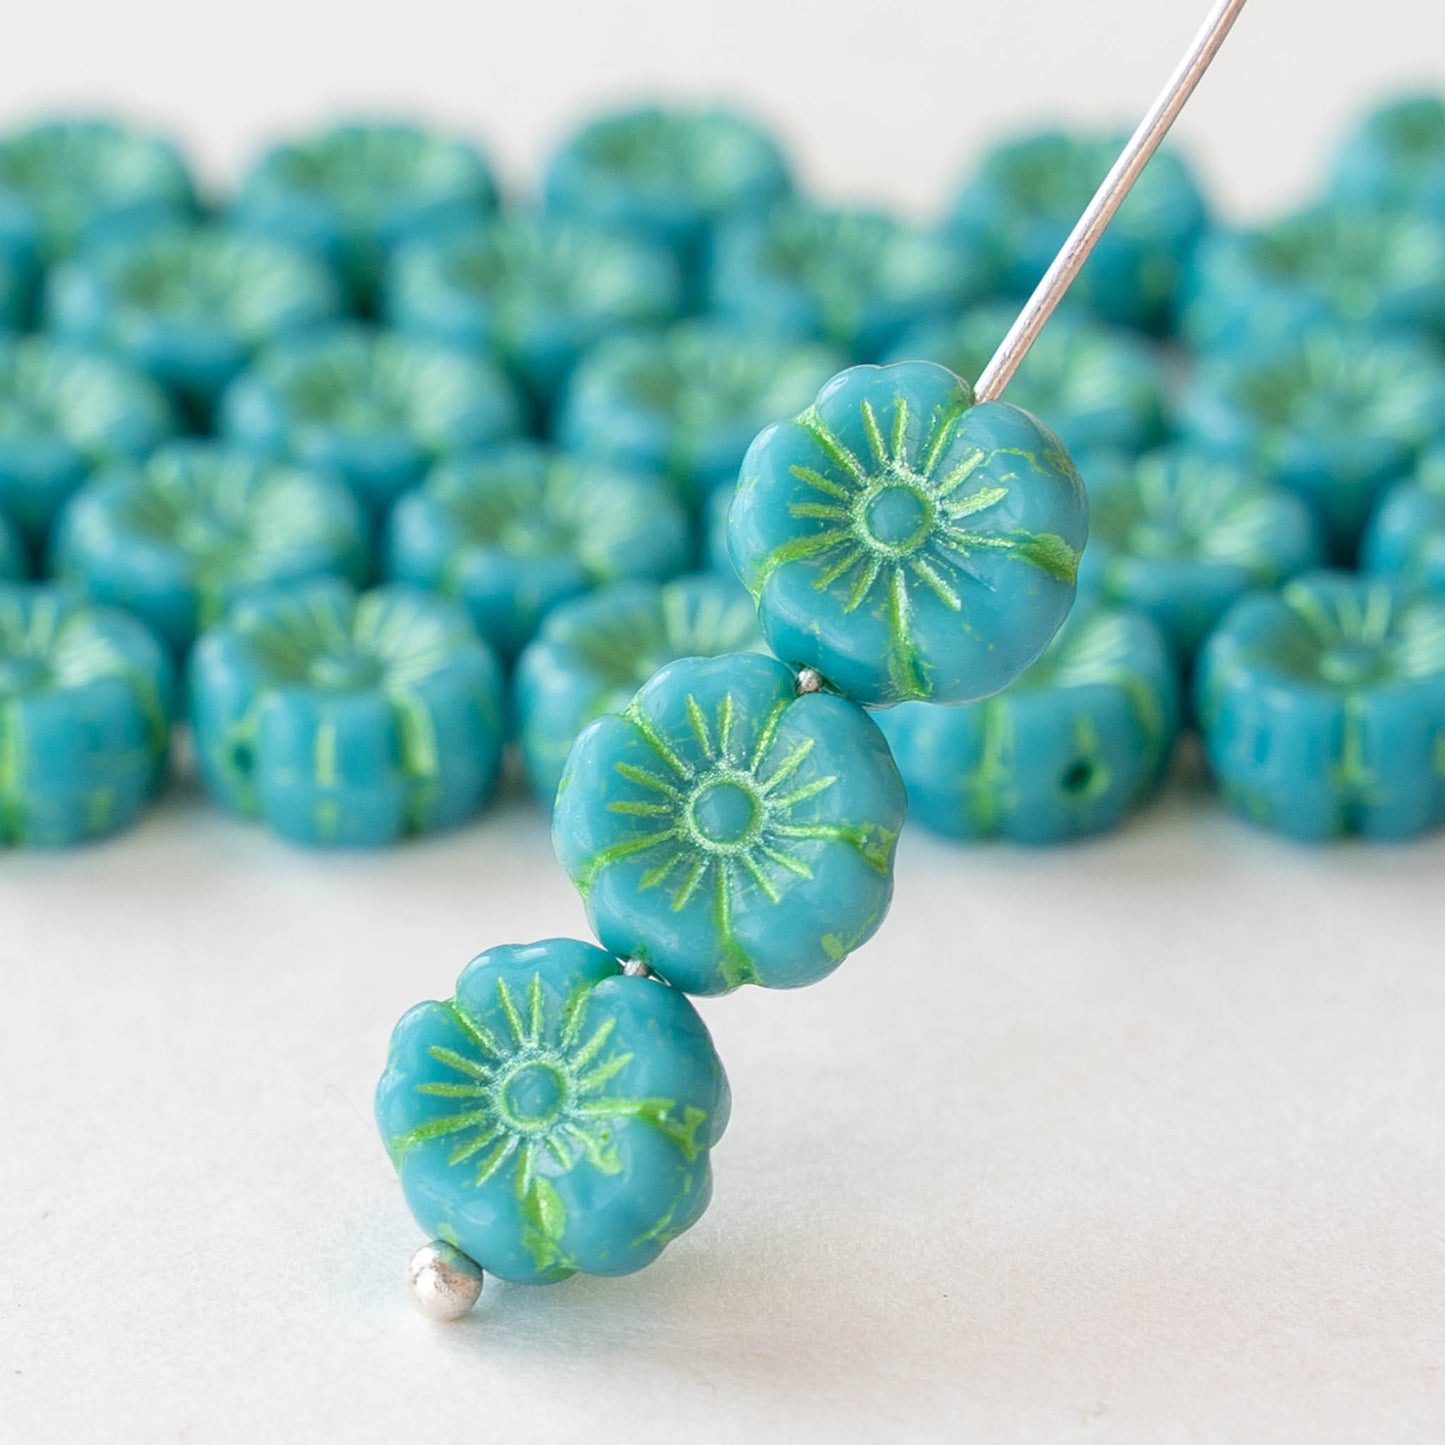 8mm Glass Flower Beads - Turquoise with Green Wash - 20 beads